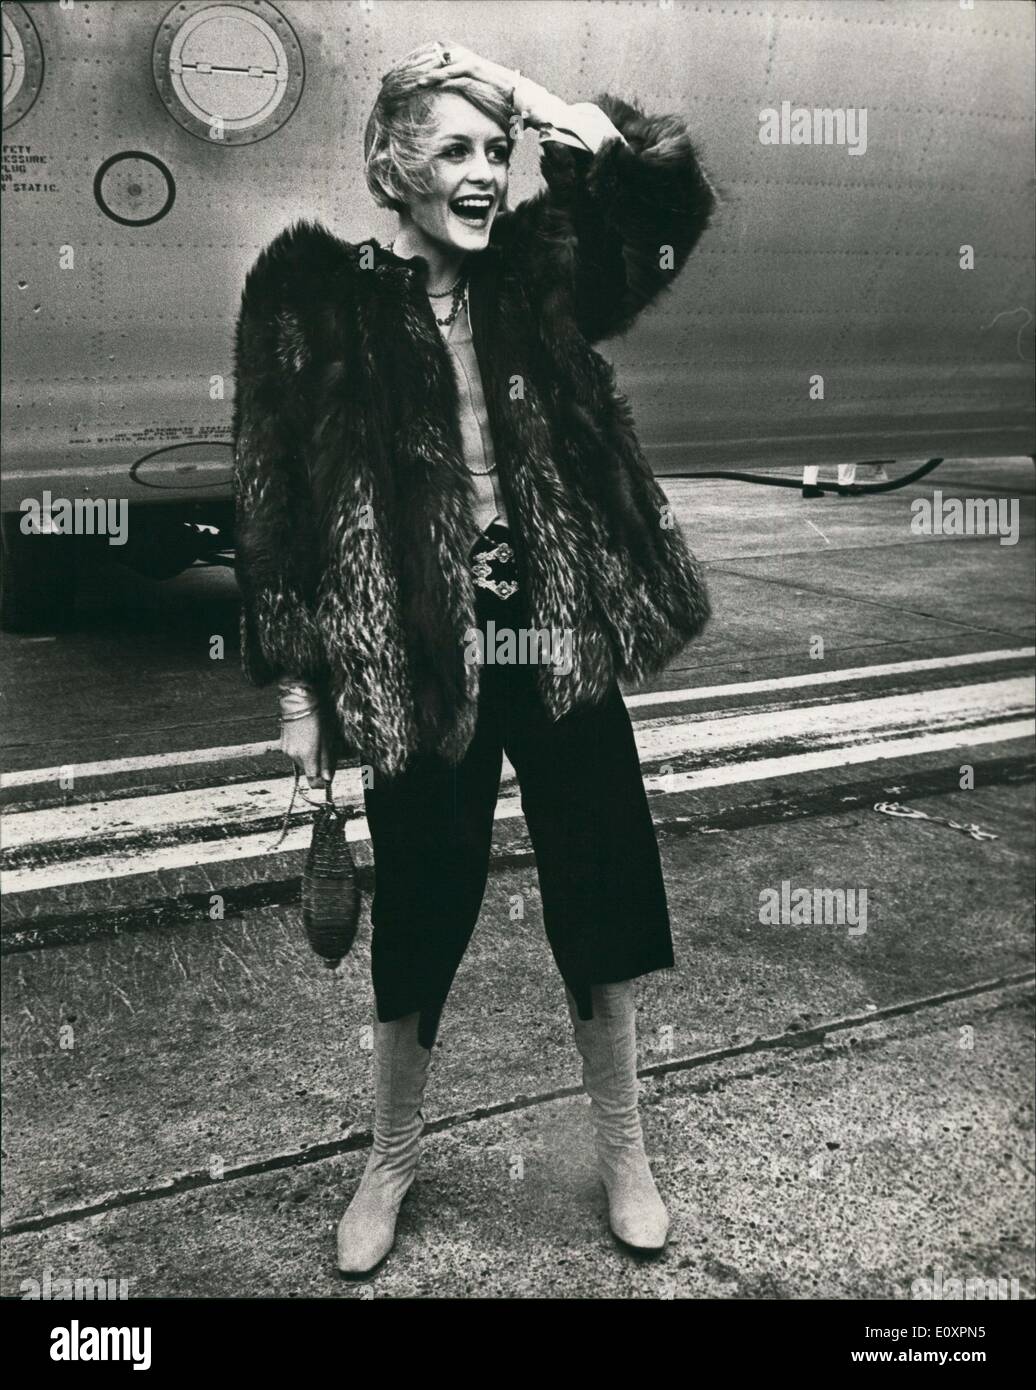 Oct. 10, 1967 - Twiggy off to japan by air to show her fashions: Accompanied by her hoy friend manager, Justin De Villeneuve, Britain's famous model, Twiggy left London Airport today to fly to Japan where she is to show a collection of her fashions. Photo shows pictured on the tarmac at London airport today Twiggy is all dressed up in her huge fur jacket and loose baggy trousers worn with leather boots. Stock Photo